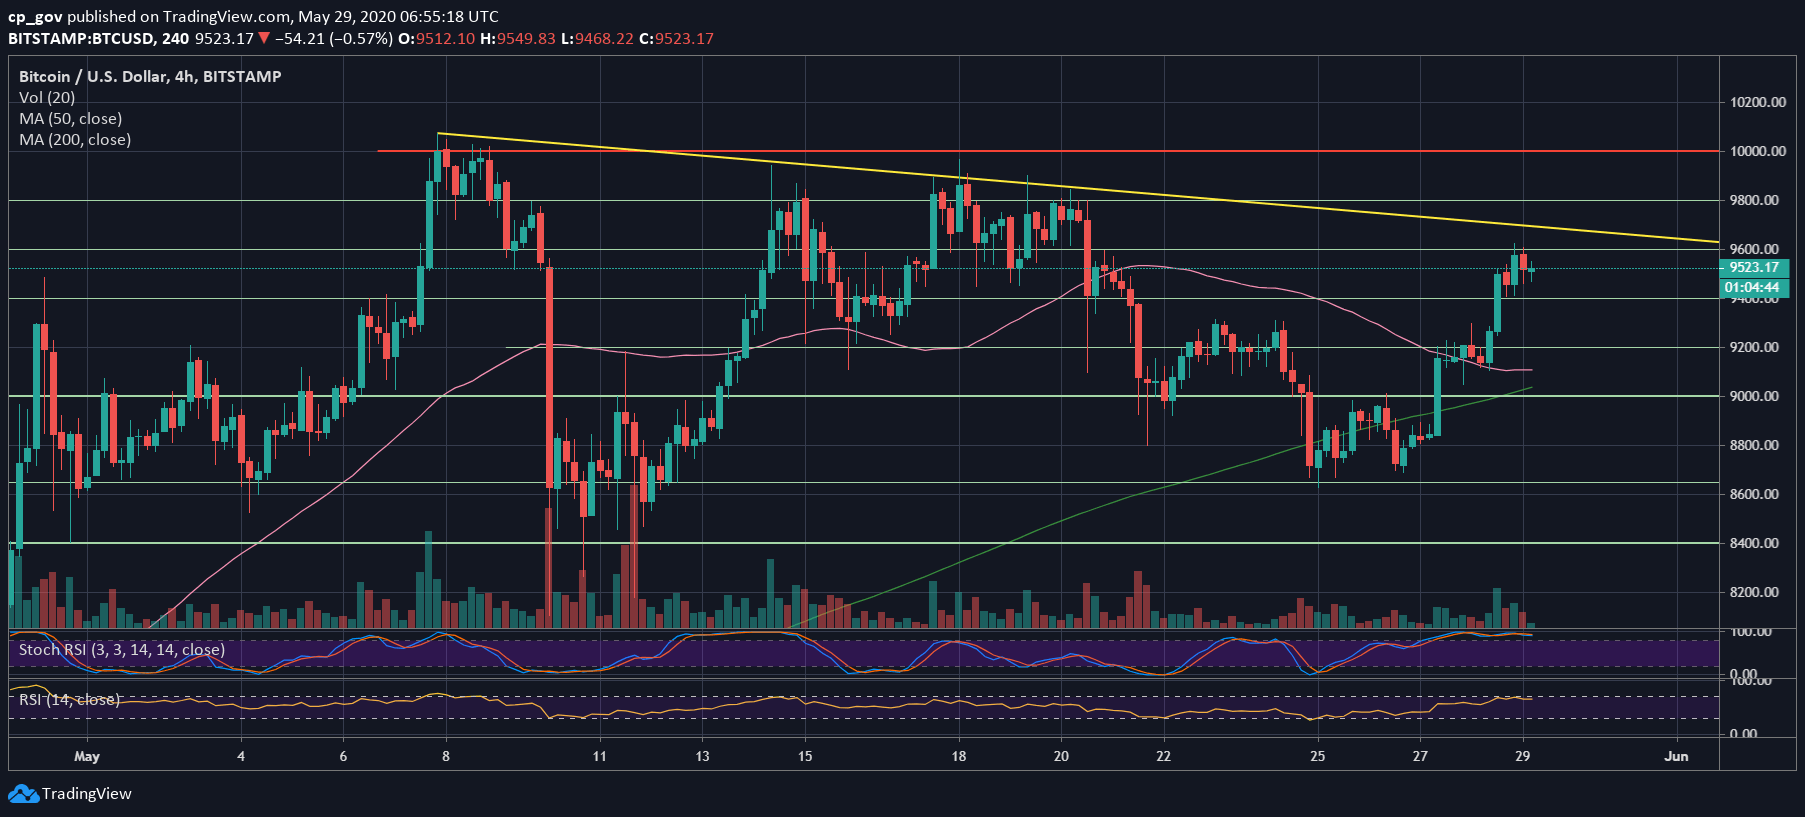 Bitcoin’s Current $900 Rally Might Turn Around Soon Upon Reaching Crucial Resistance: BTC Price Analysis